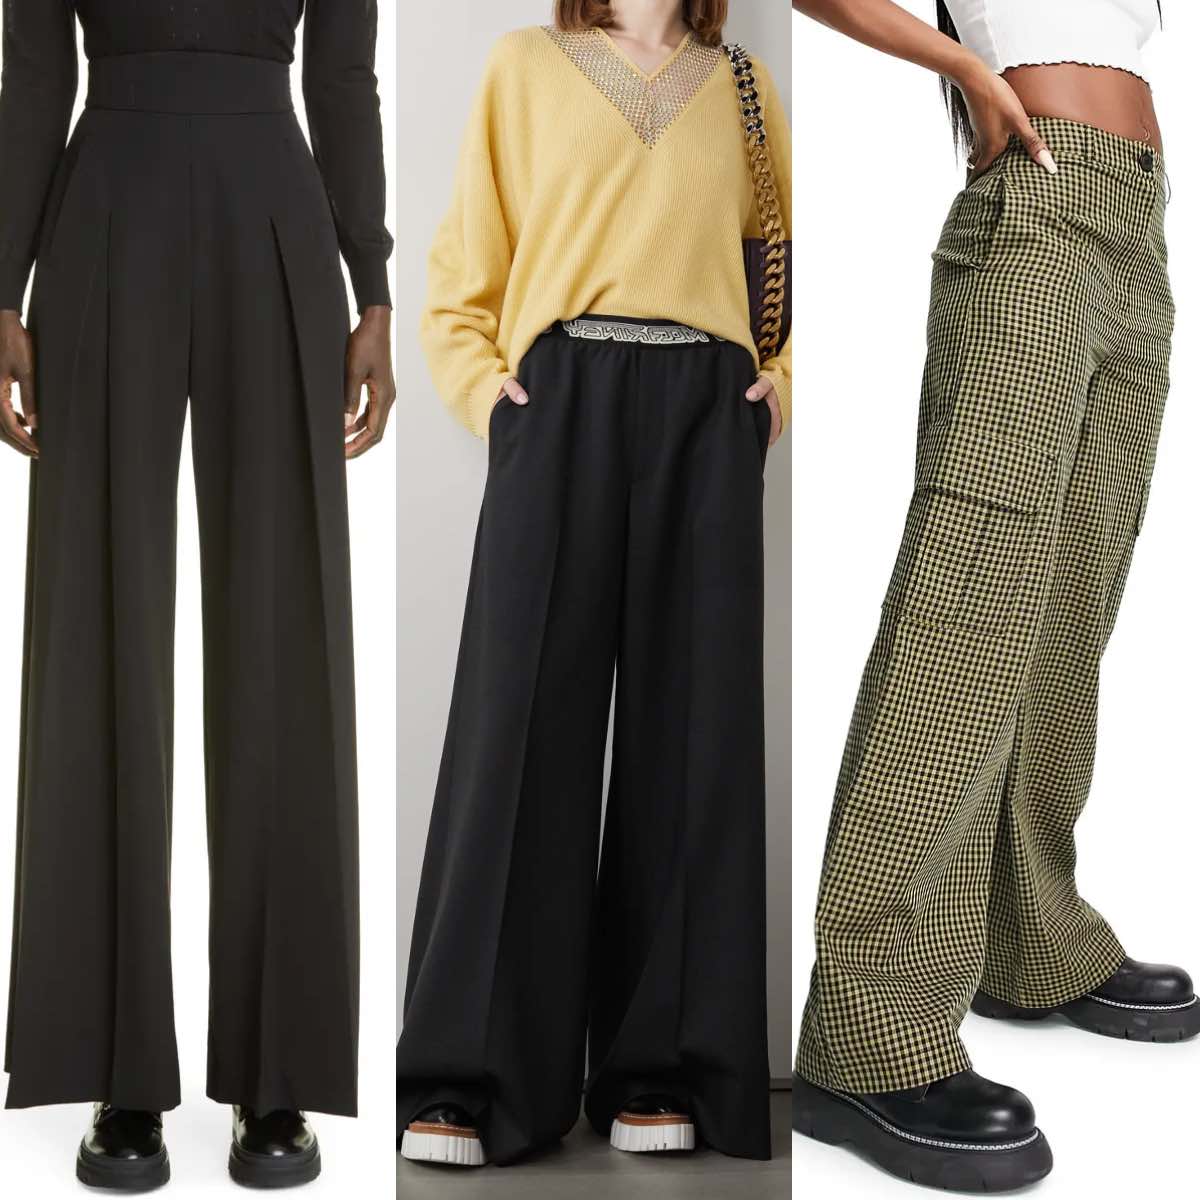 3 women wearing combat boots with wide leg pants and trousers.